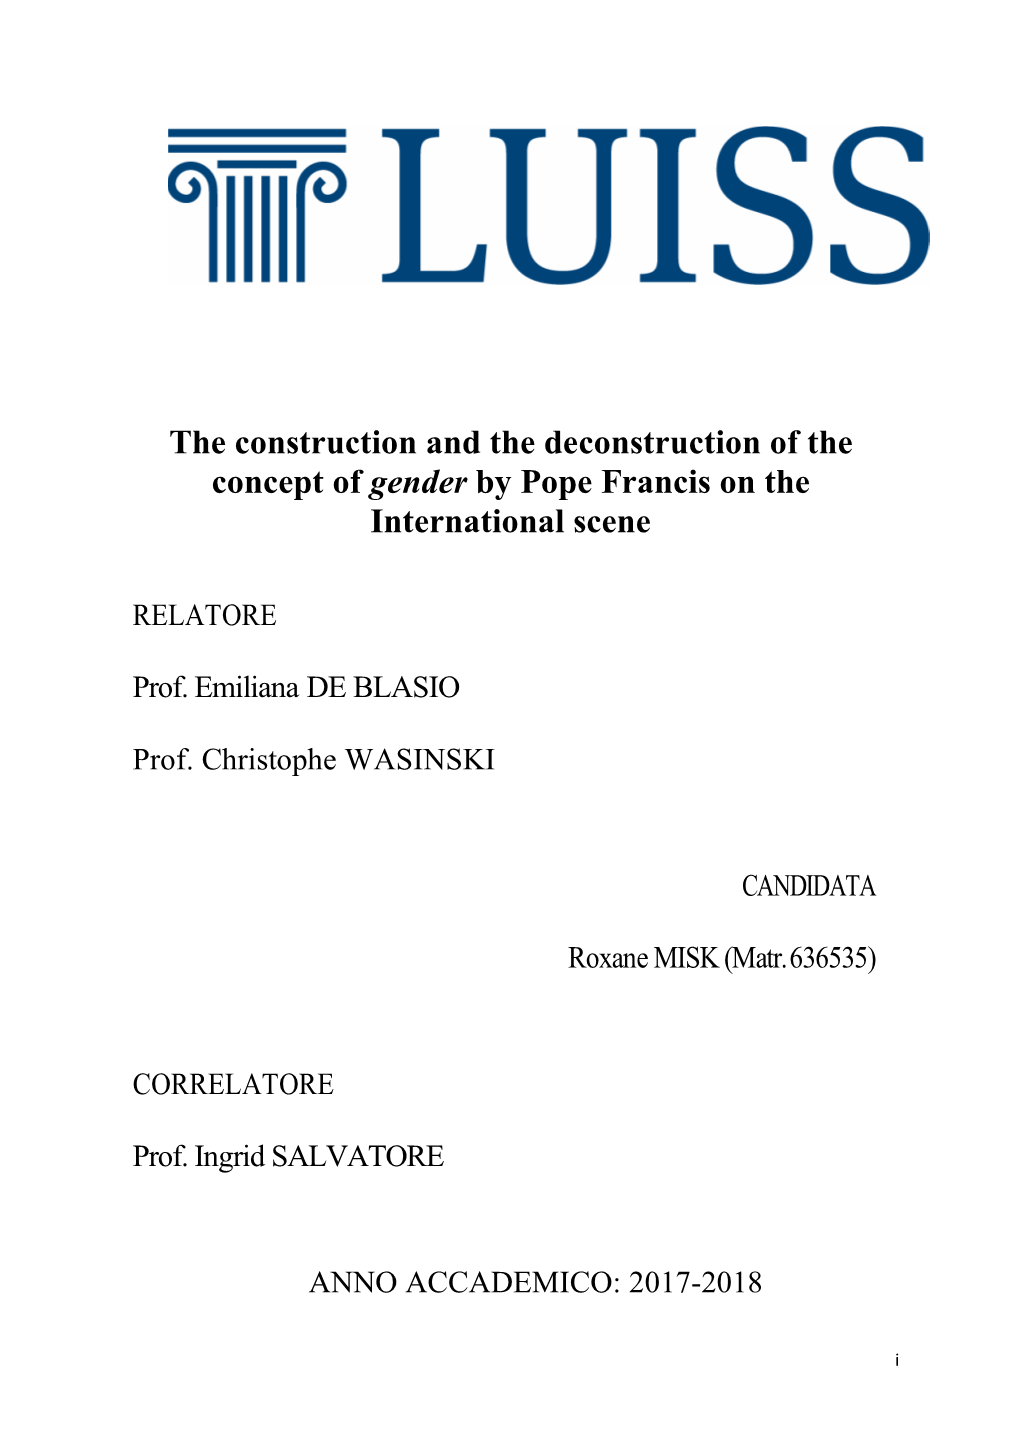 LUISS THESIS Roxane Misk